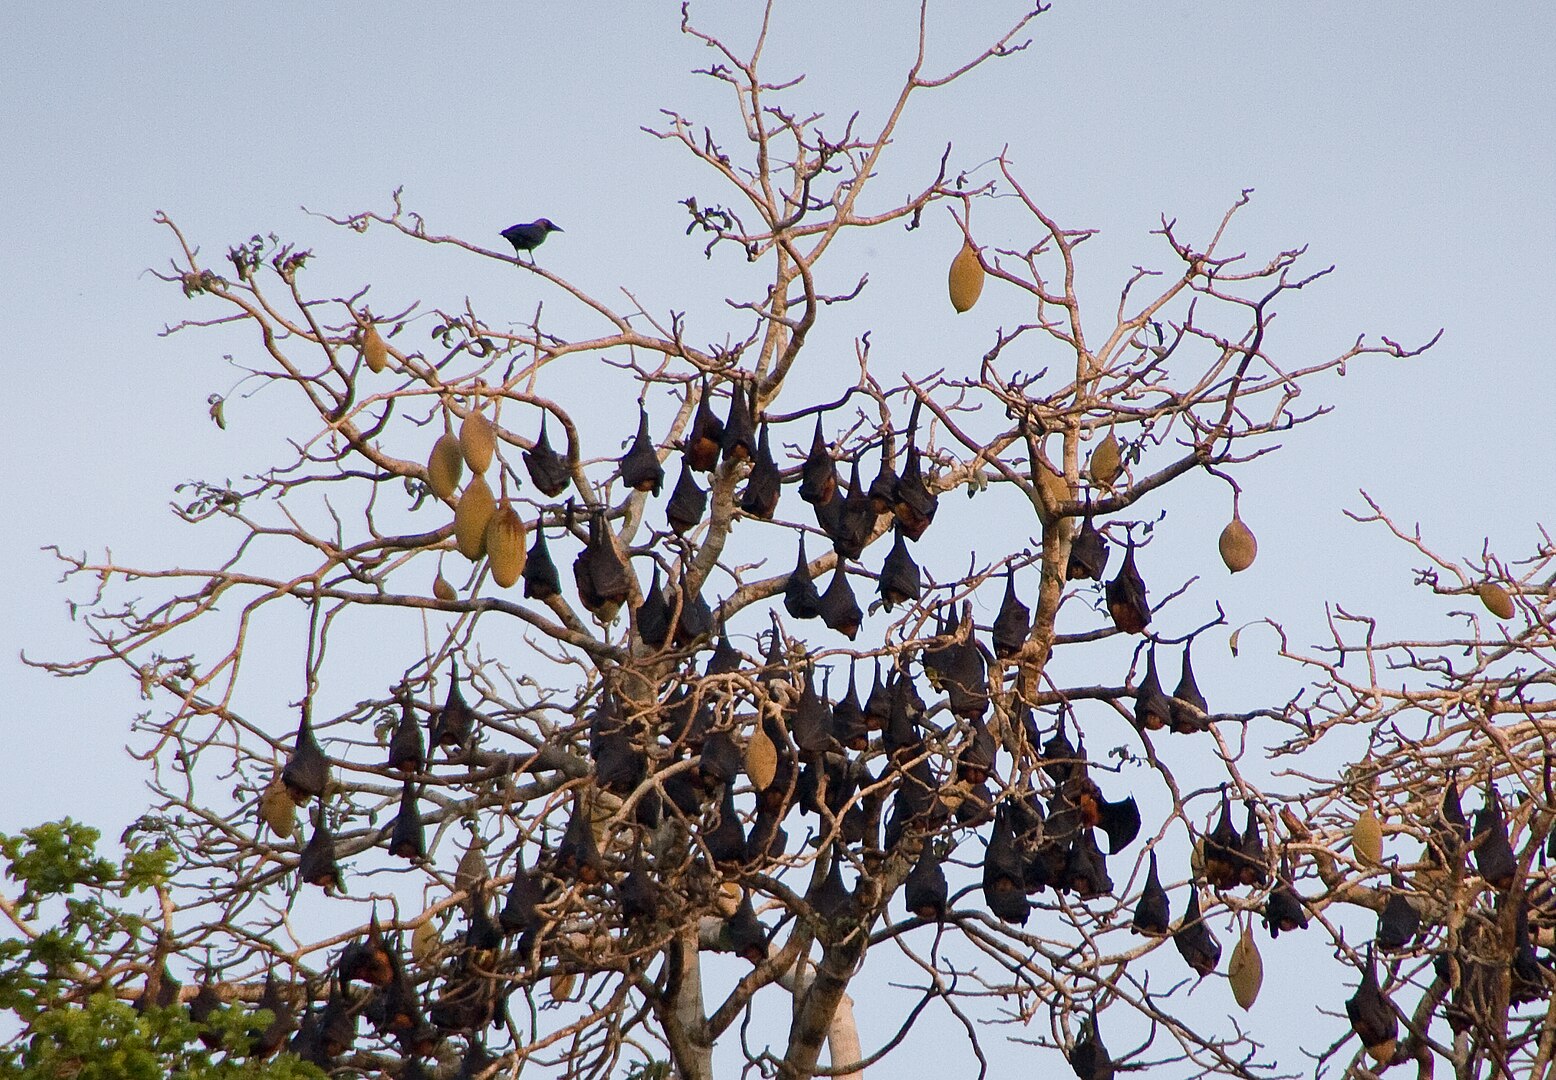 A colony of sleeping Pemba flying foxes in the Ngezi reserve on Pemba Island in Tanzania. Image Credit: By Marcel Oosterwijk, Wiki Commons.